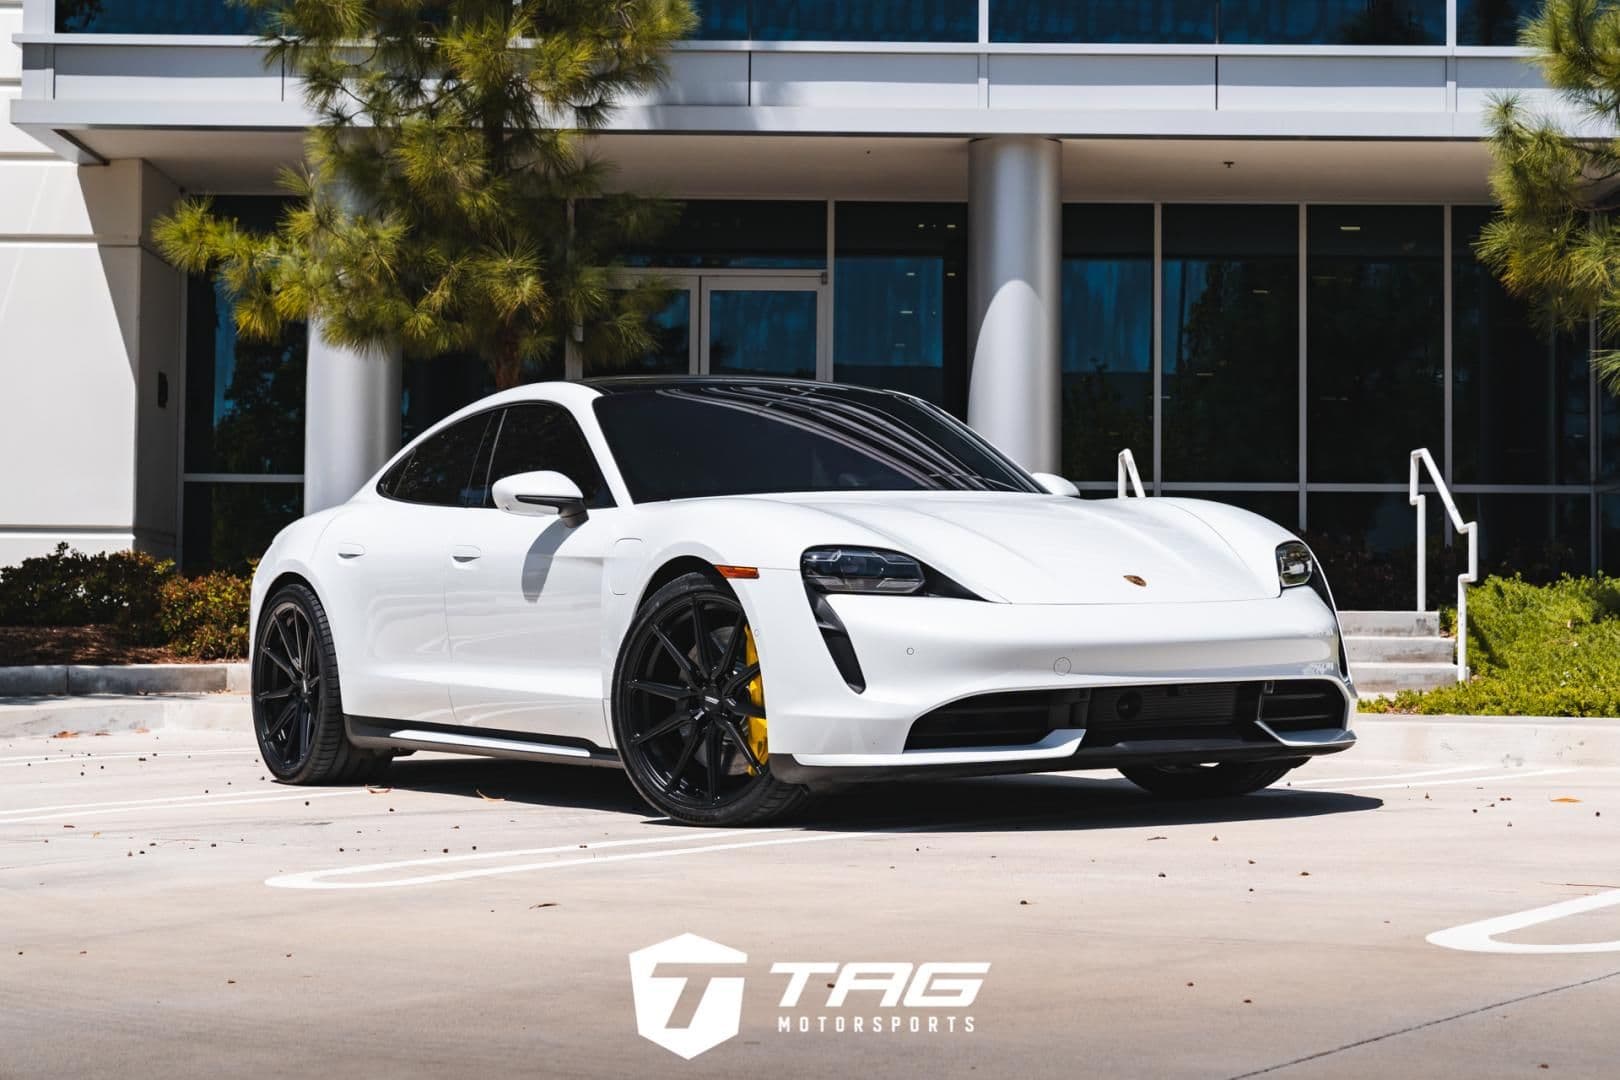 Wheels and Tires/Axles - VOSSEN WHEEL & TIRE PACKAGES - 15% OFF | TAG MOTORSPORTS - New - Vista, CA 92081, United States